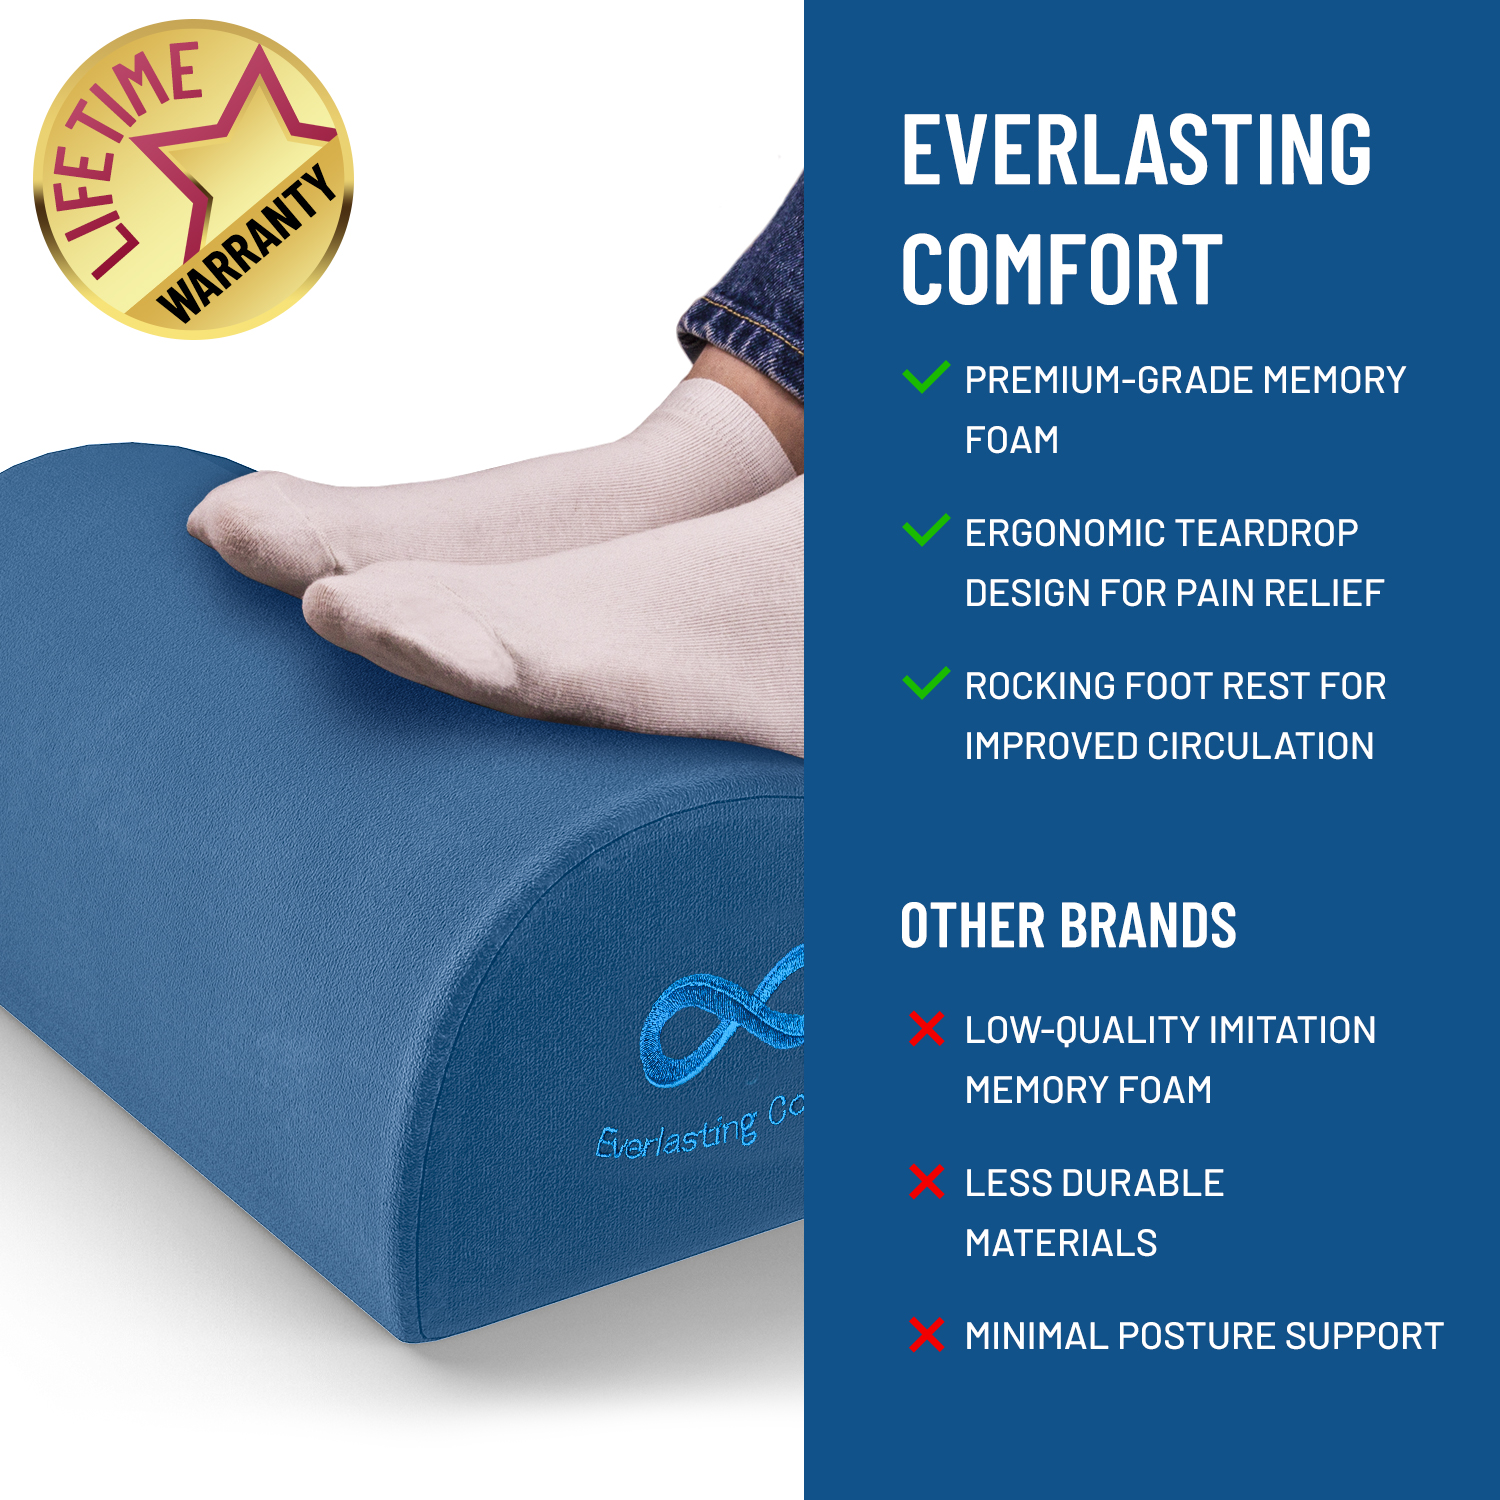 Everlasting Comfort Foot Rest for Under Desk - Kick up Your feet, Improve Circulation, Work from Home Memory Foam Footrest Pillow, Foot Stool for Office, Home, Gaming, Computer Accessories (Navy Blue) - image 2 of 9